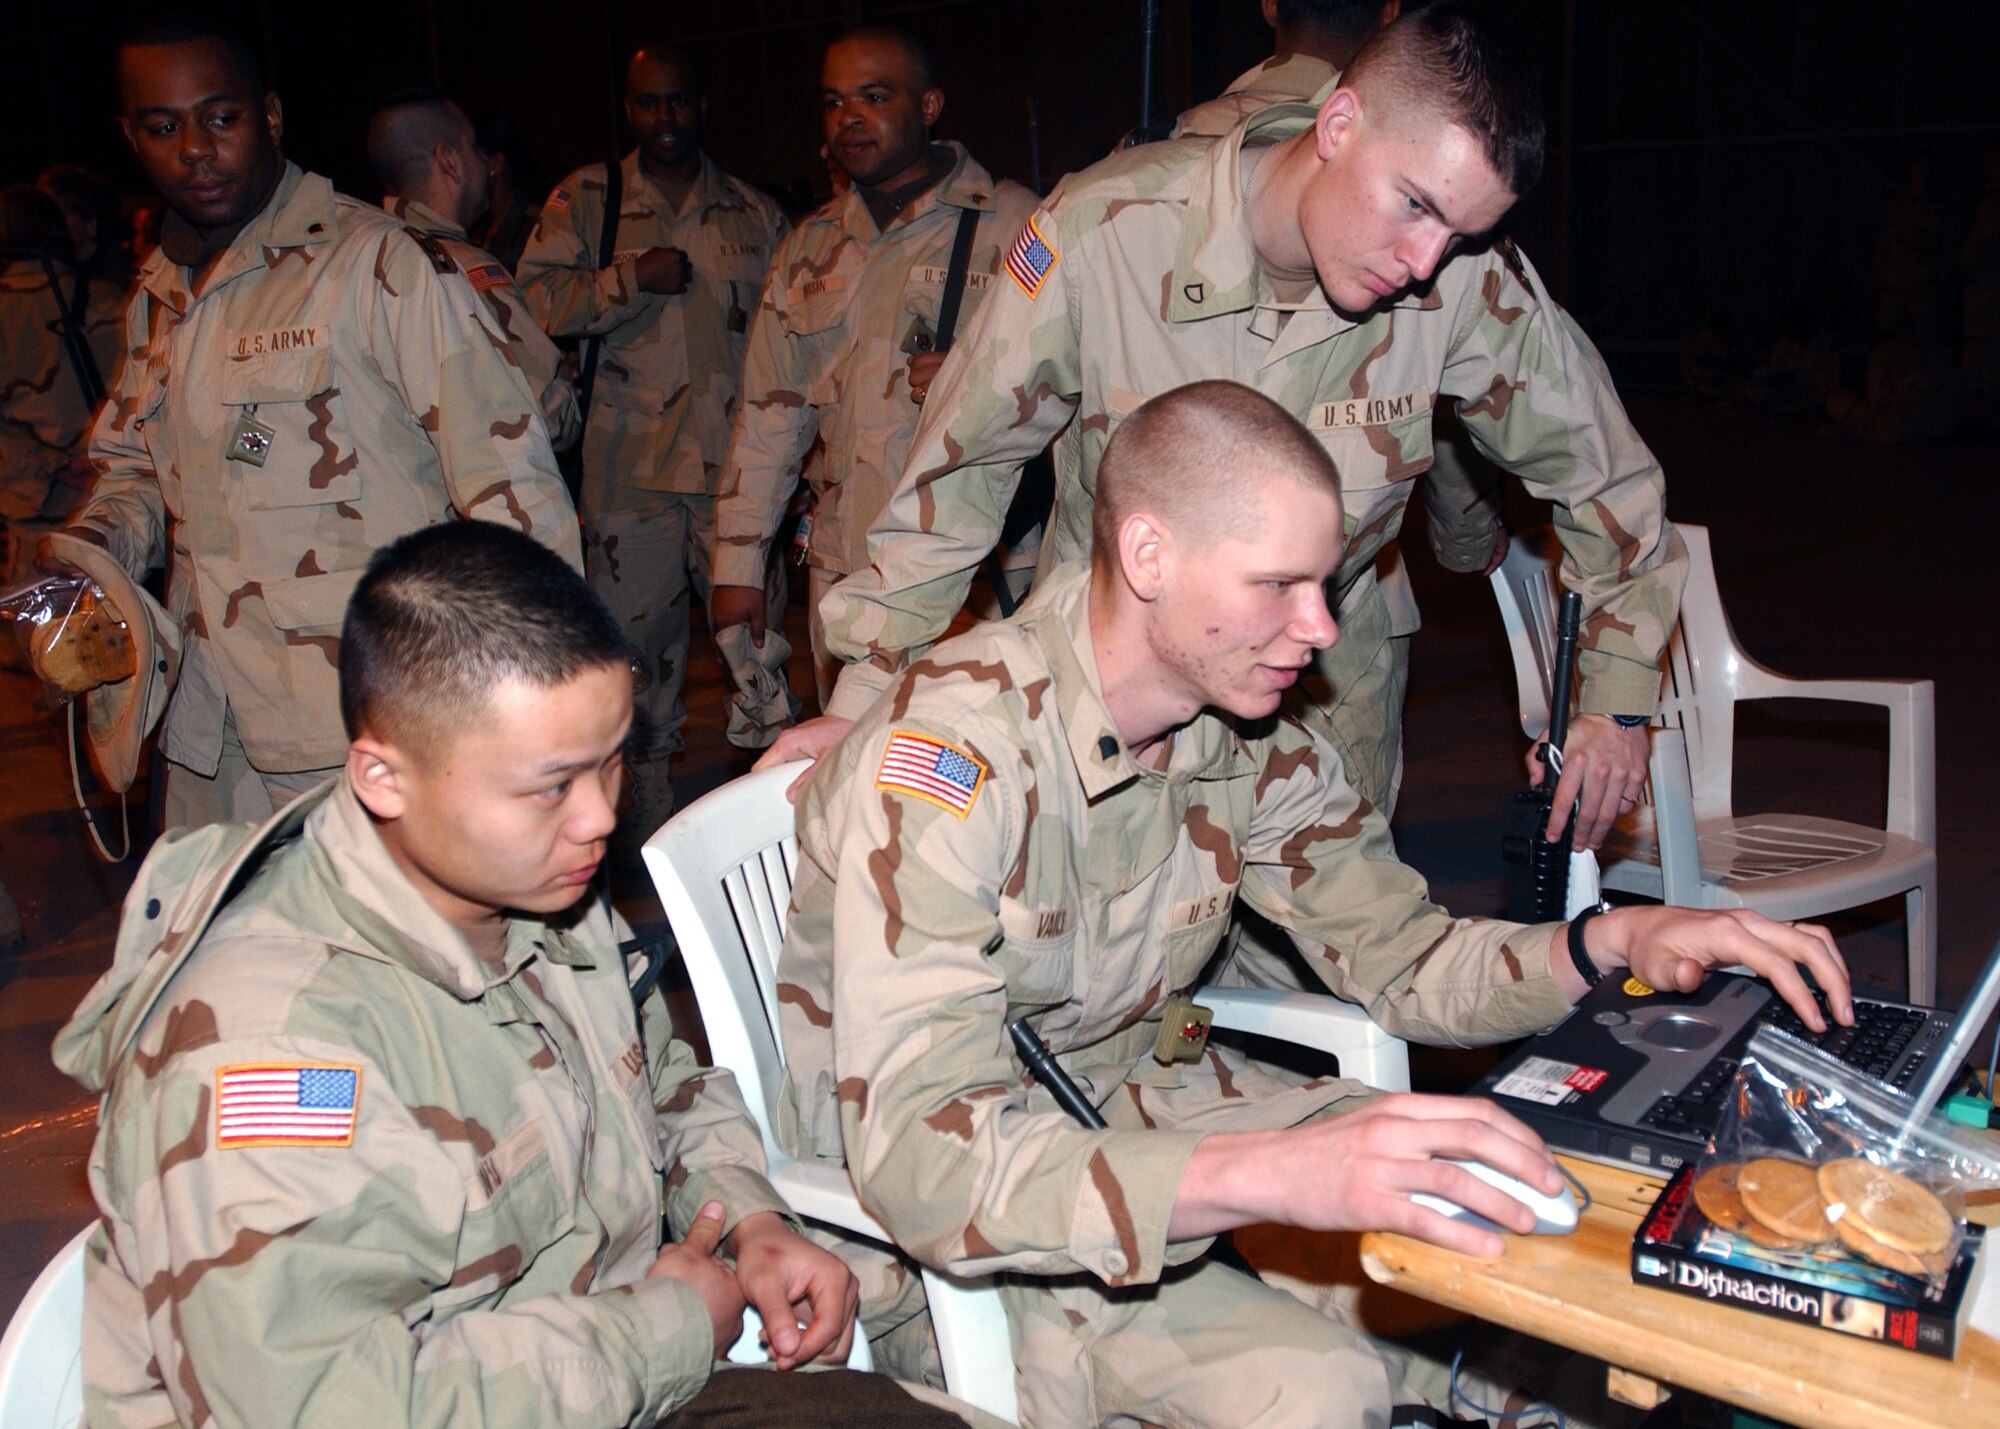 AVIANO AIR BASE, Italy -- Army soldiers from Fort Lee, Va., play a computer game while on a layover here awaiting transportation to a forward-deployed location. (U.S. Air Force photo by Airman 1st Class Nichole Adamowicz)